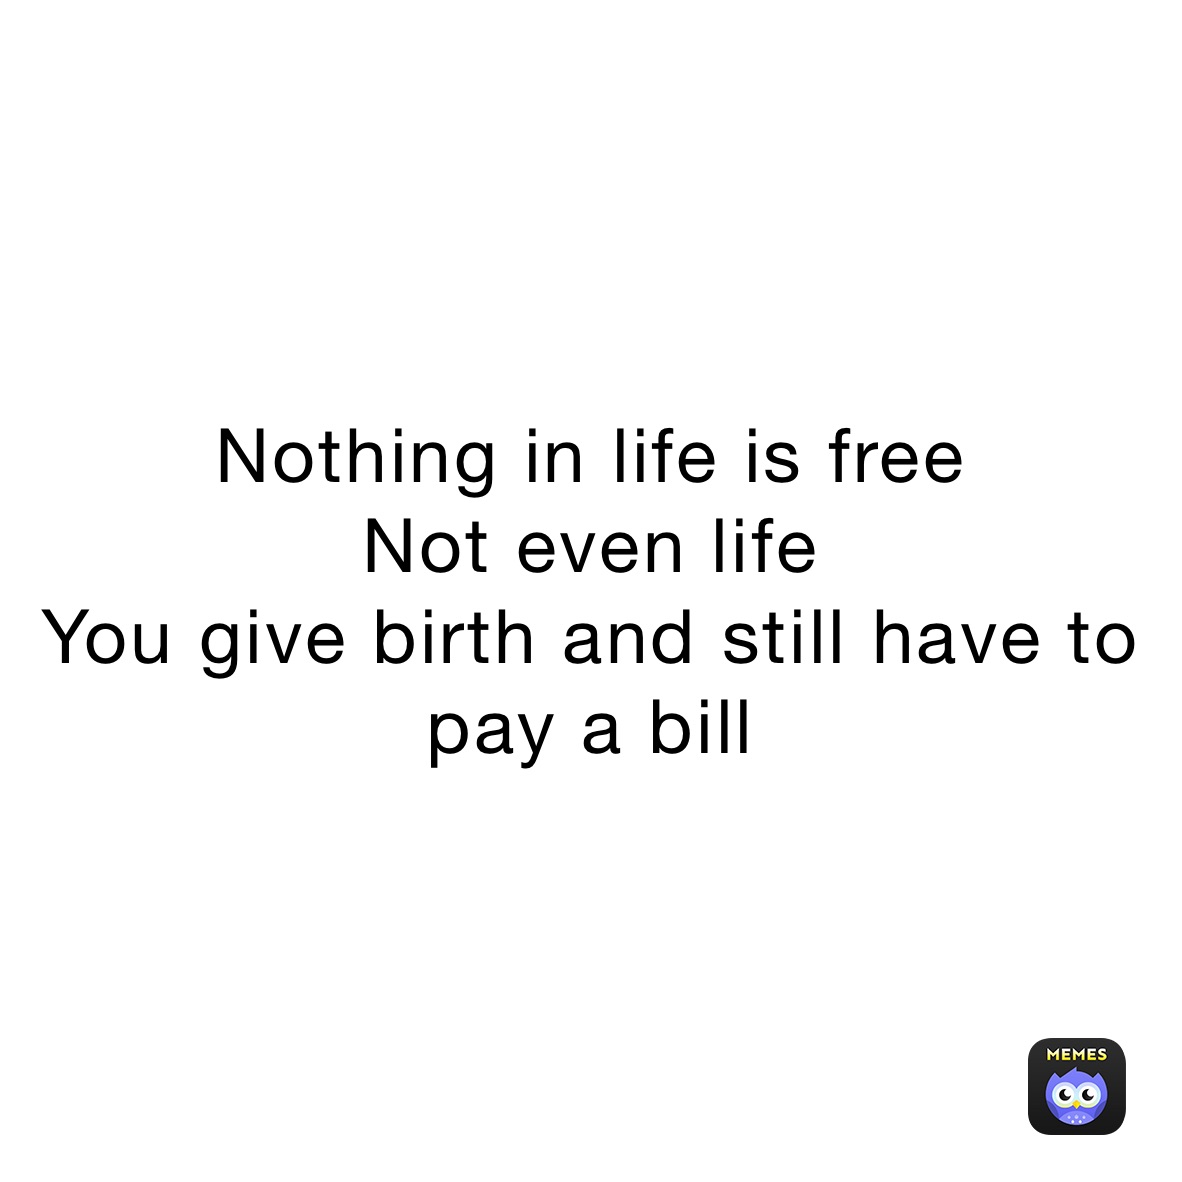 Nothing in life is free
Not even life
You give birth and still have to pay a bill